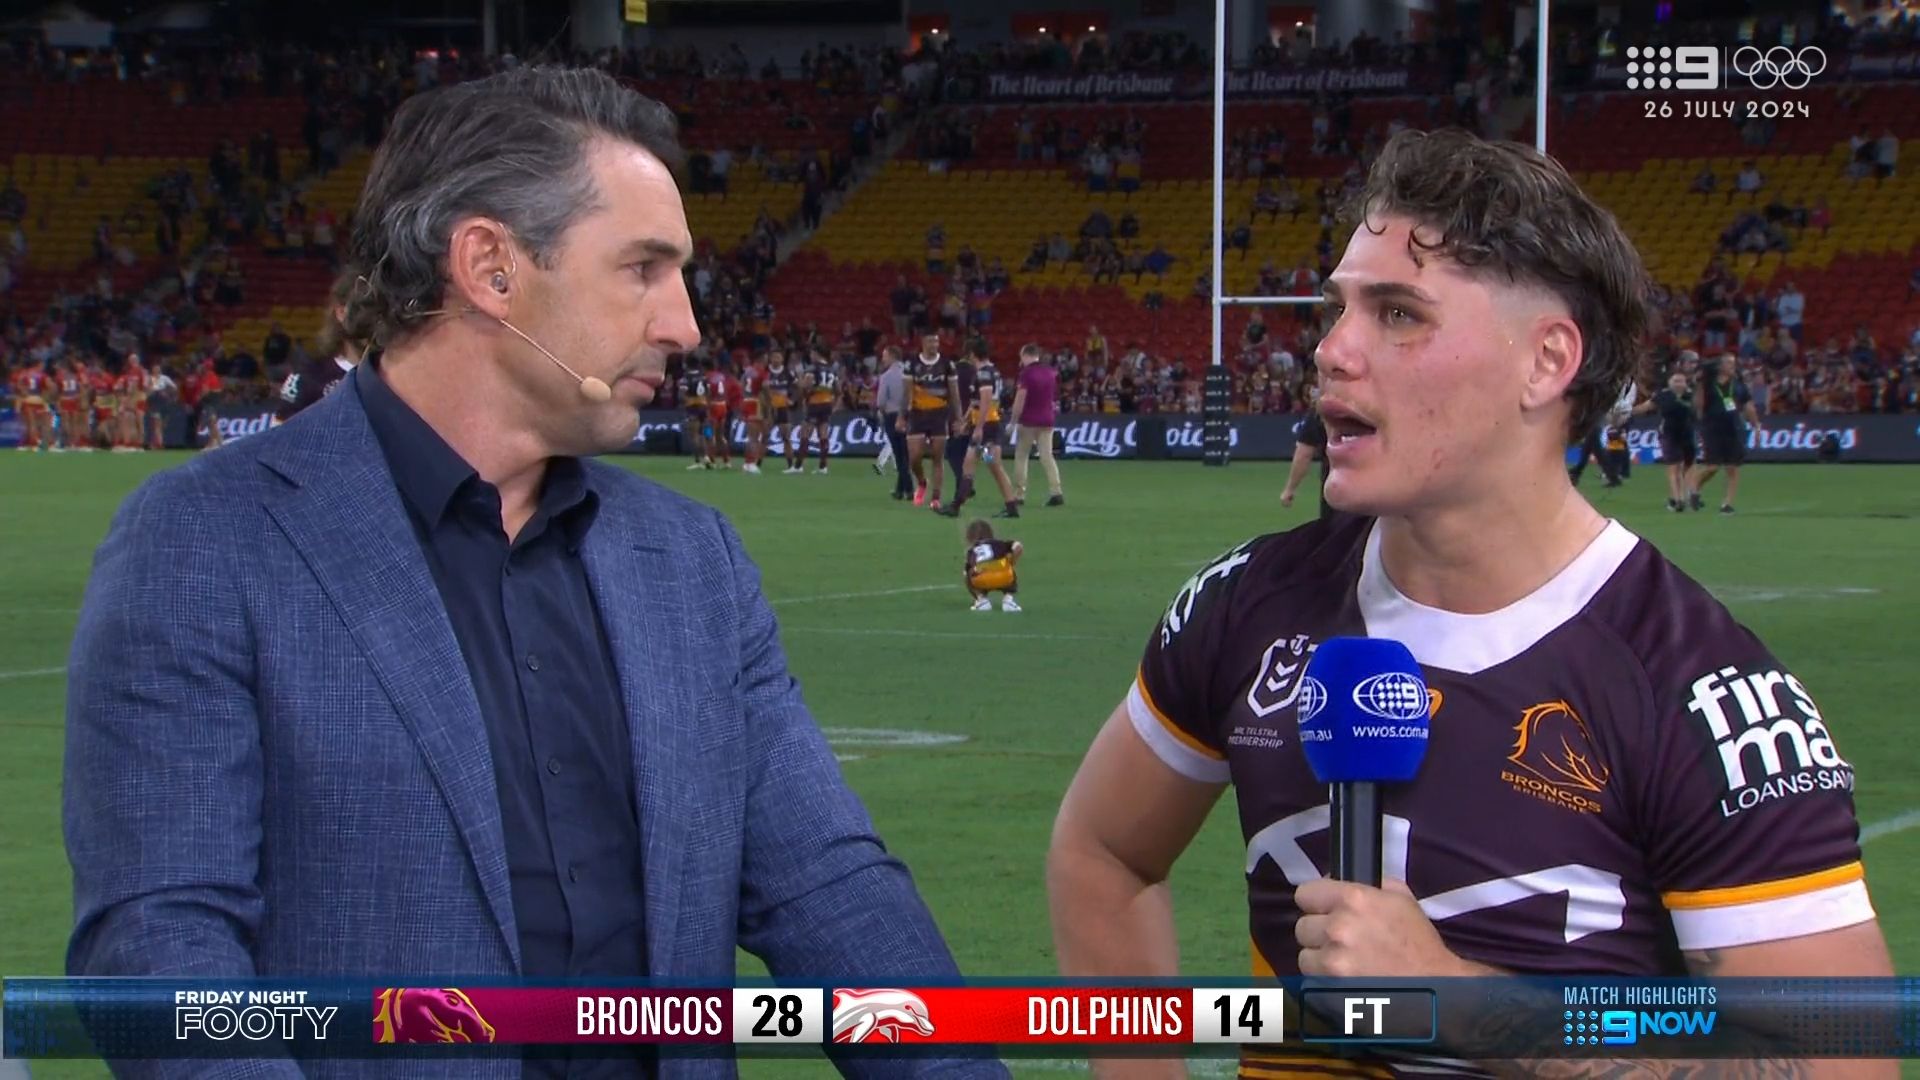 'It was annoying': Reece Walsh opens up on 'rusty' return as Broncos score impressive victory